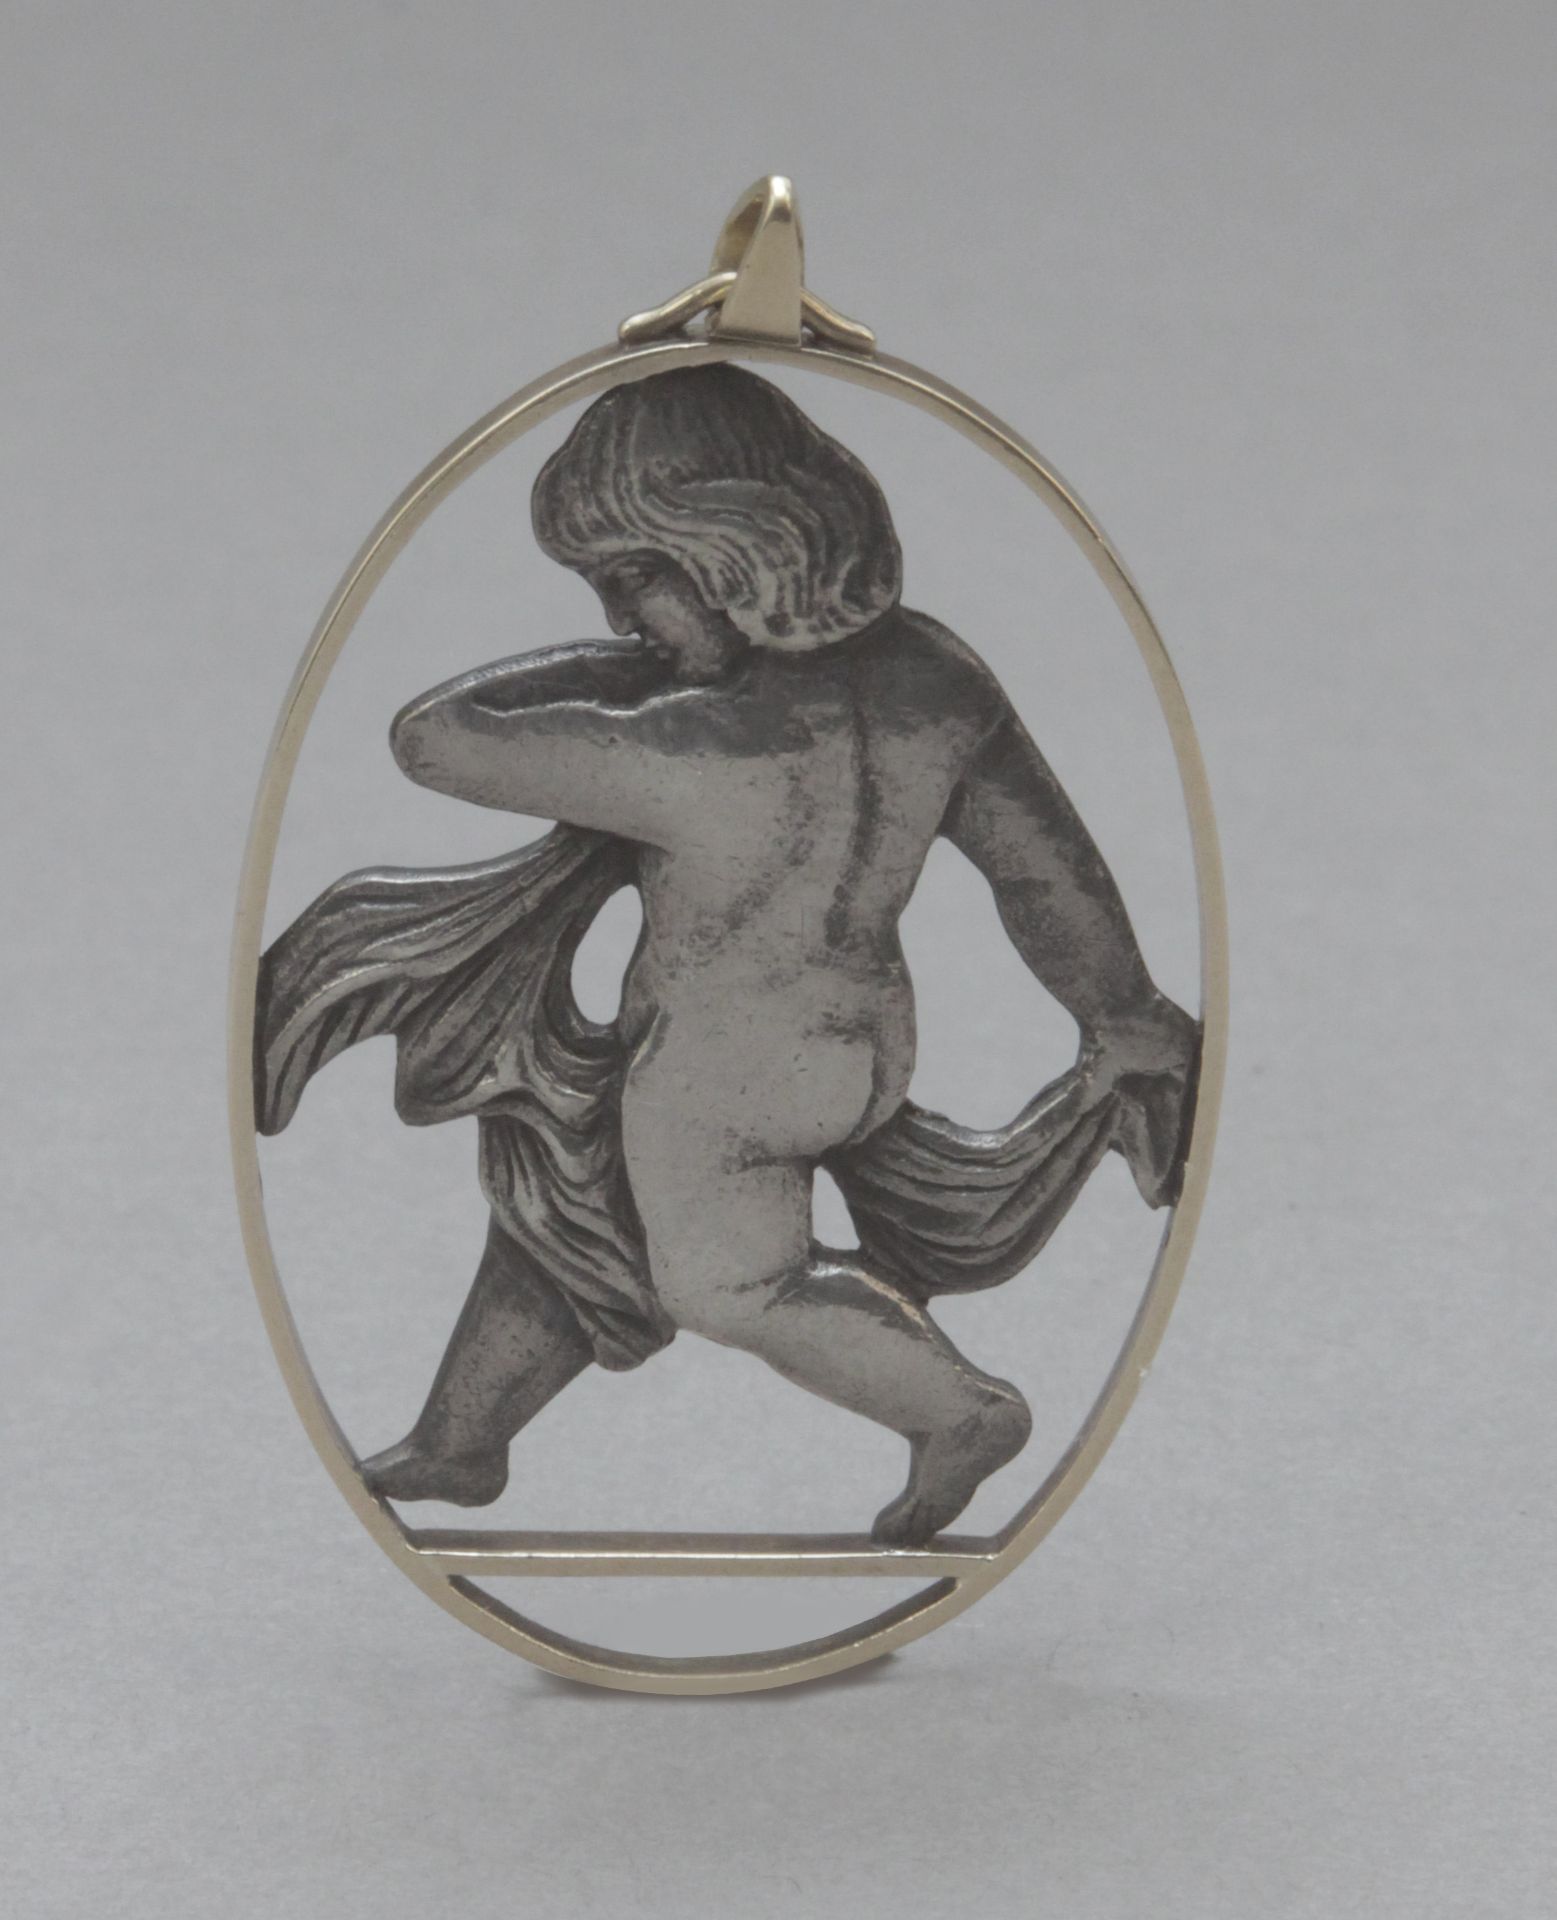 A 20th century silver and gold pendant - Image 2 of 3